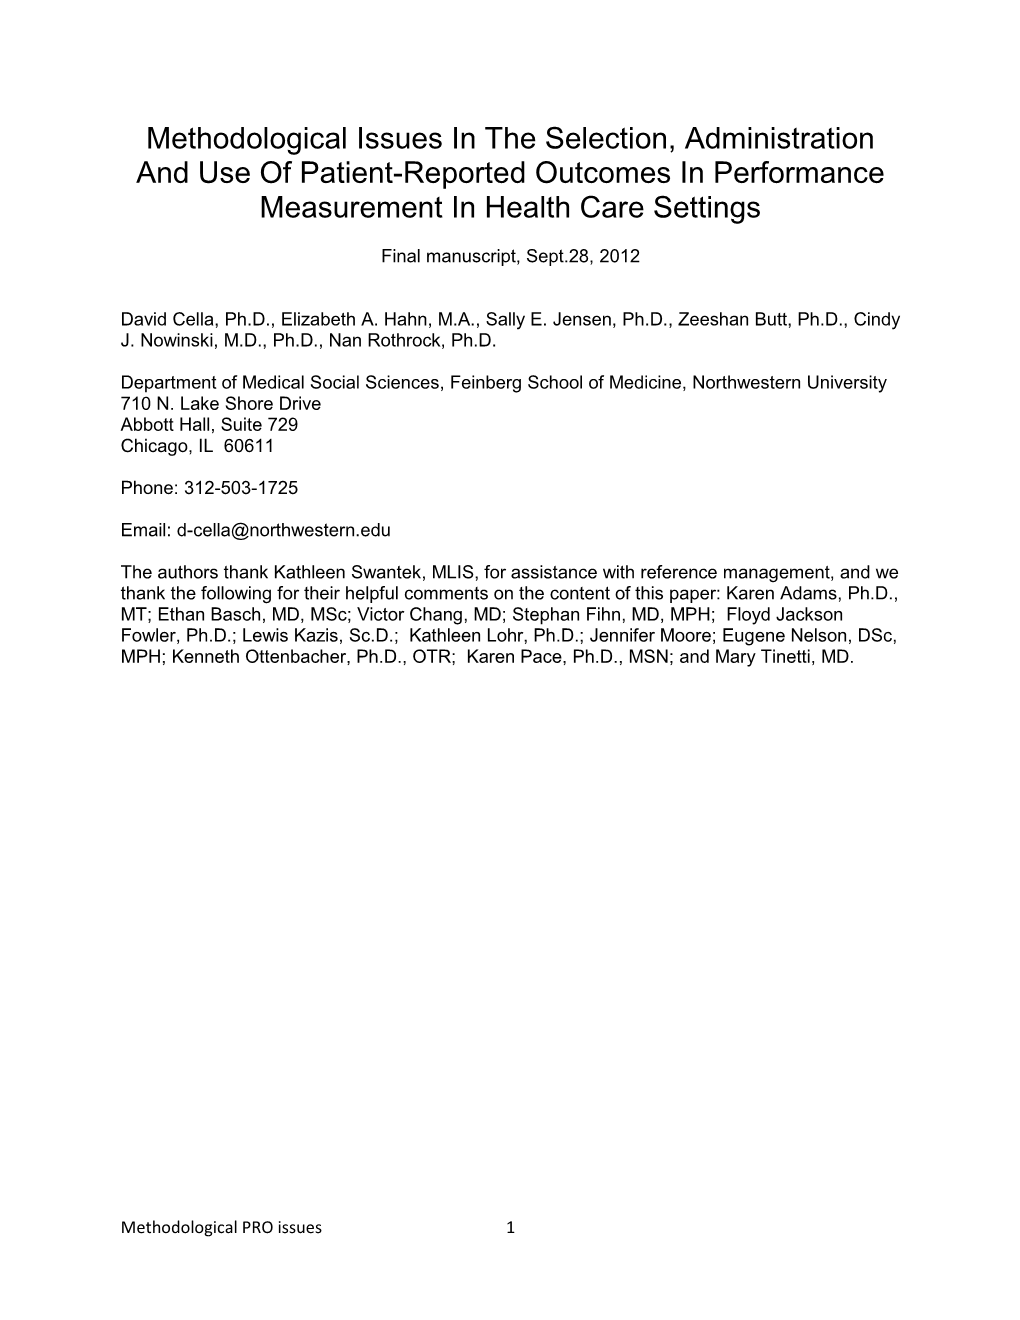 Reported Outcomes in Performance Measurement in Health Care Settings